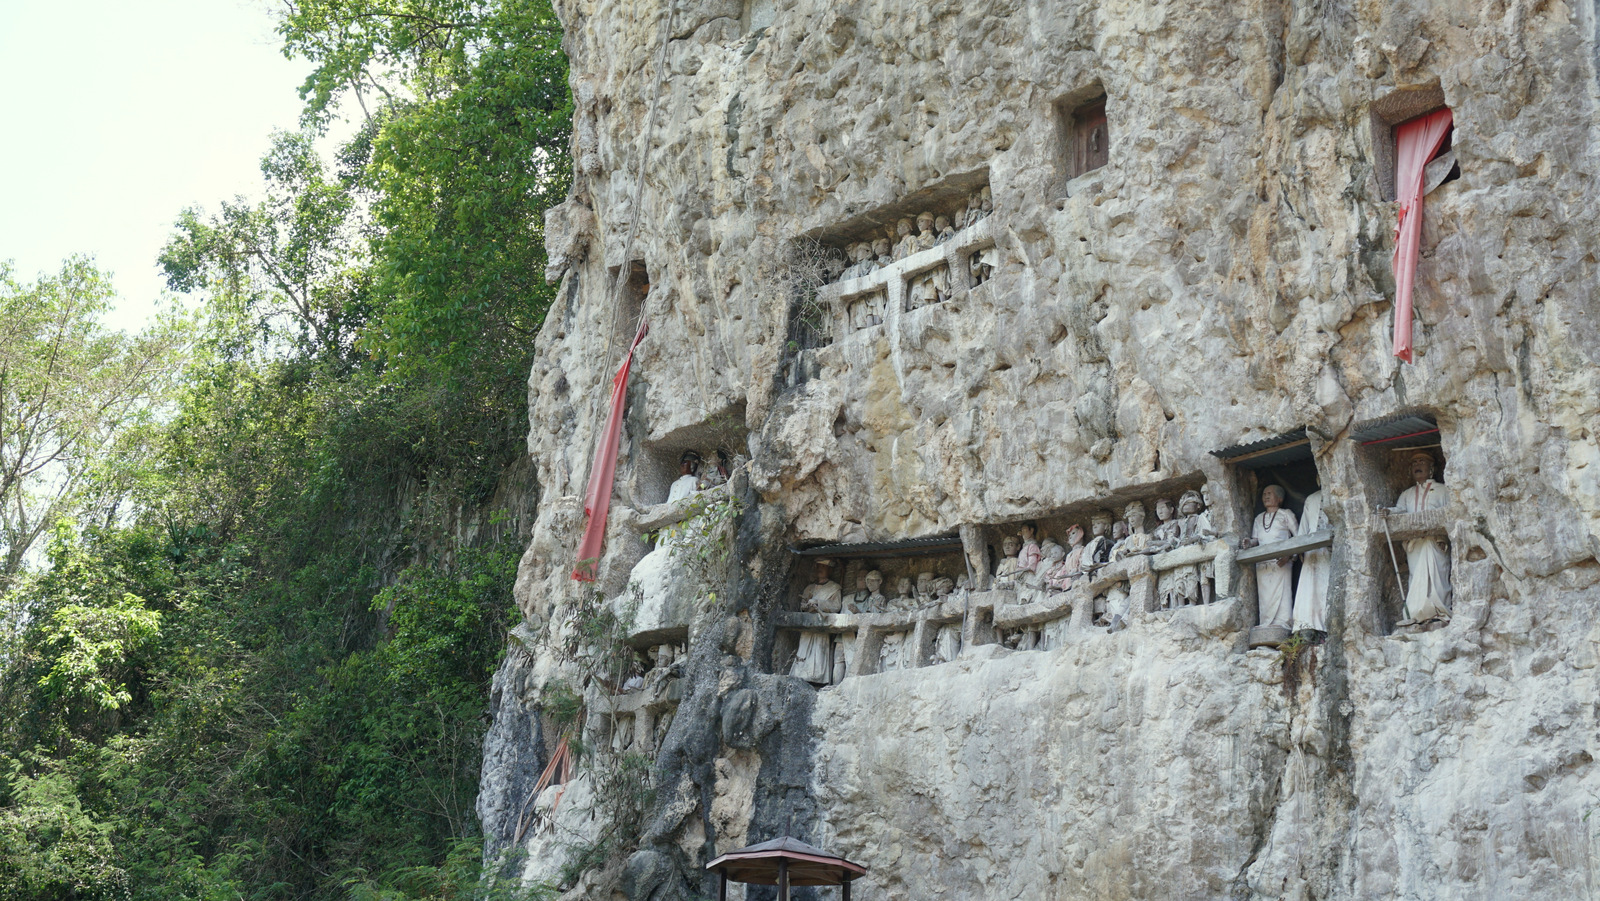 Lemo is one of the oldest burial cliffs in Toraja with carved wooden effigies of the departed. These effigies are called Tau Tau and represent the Toraja nobles. Photo by Upneet Kaur-Nagpal